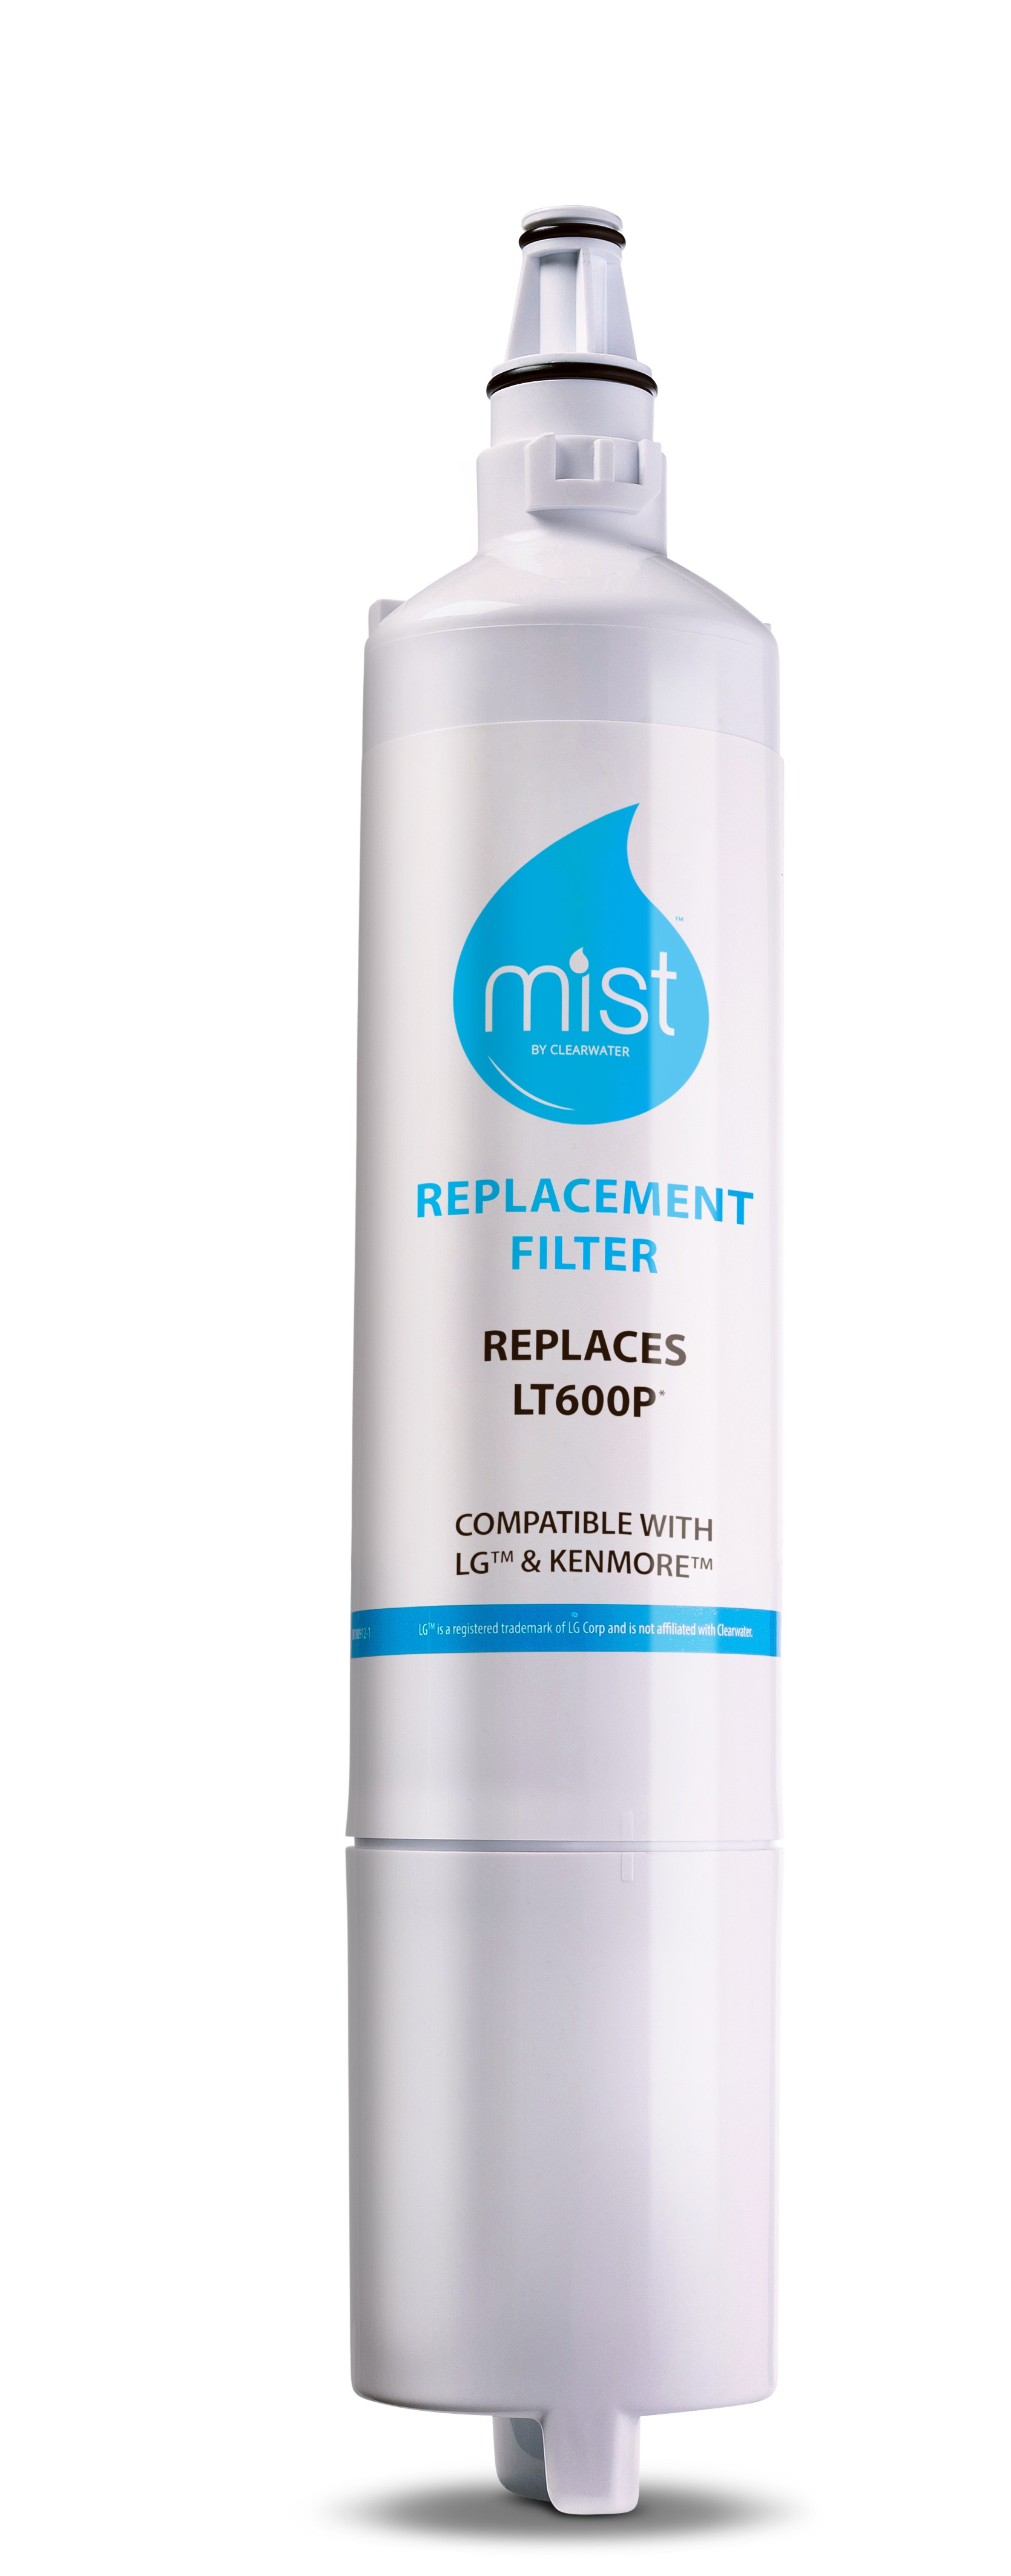 MIST LG 5231JA2006B Water Filter Replacement, Compatible With: 5231JA2006A, Kenmore 469990, LT600P, 3 Pack